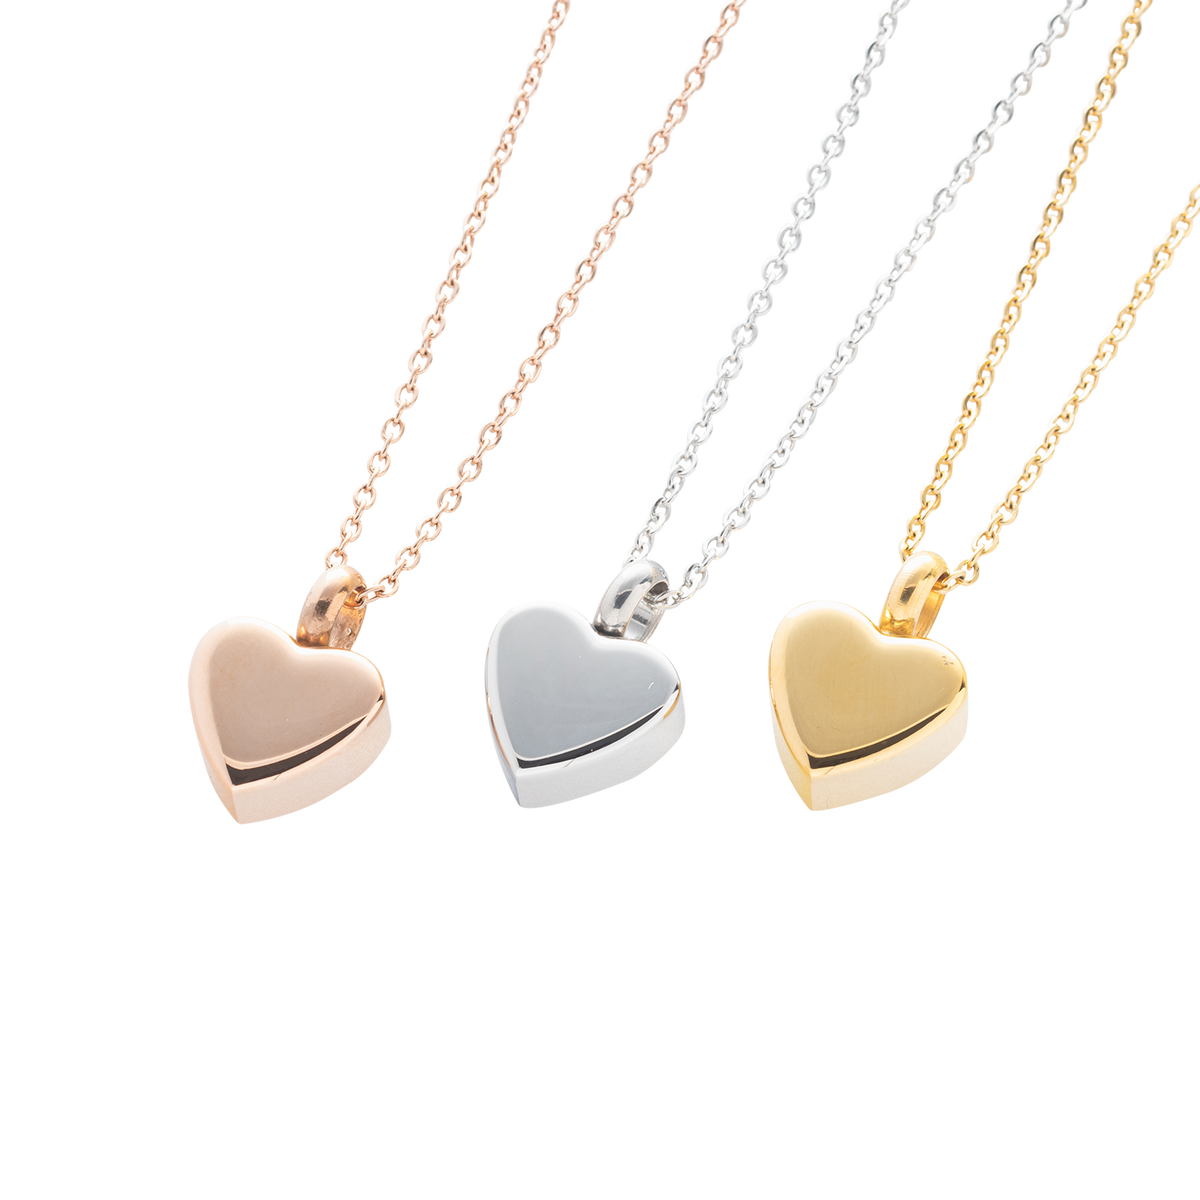 Three different options of our Memorial Cremation Urn Necklace